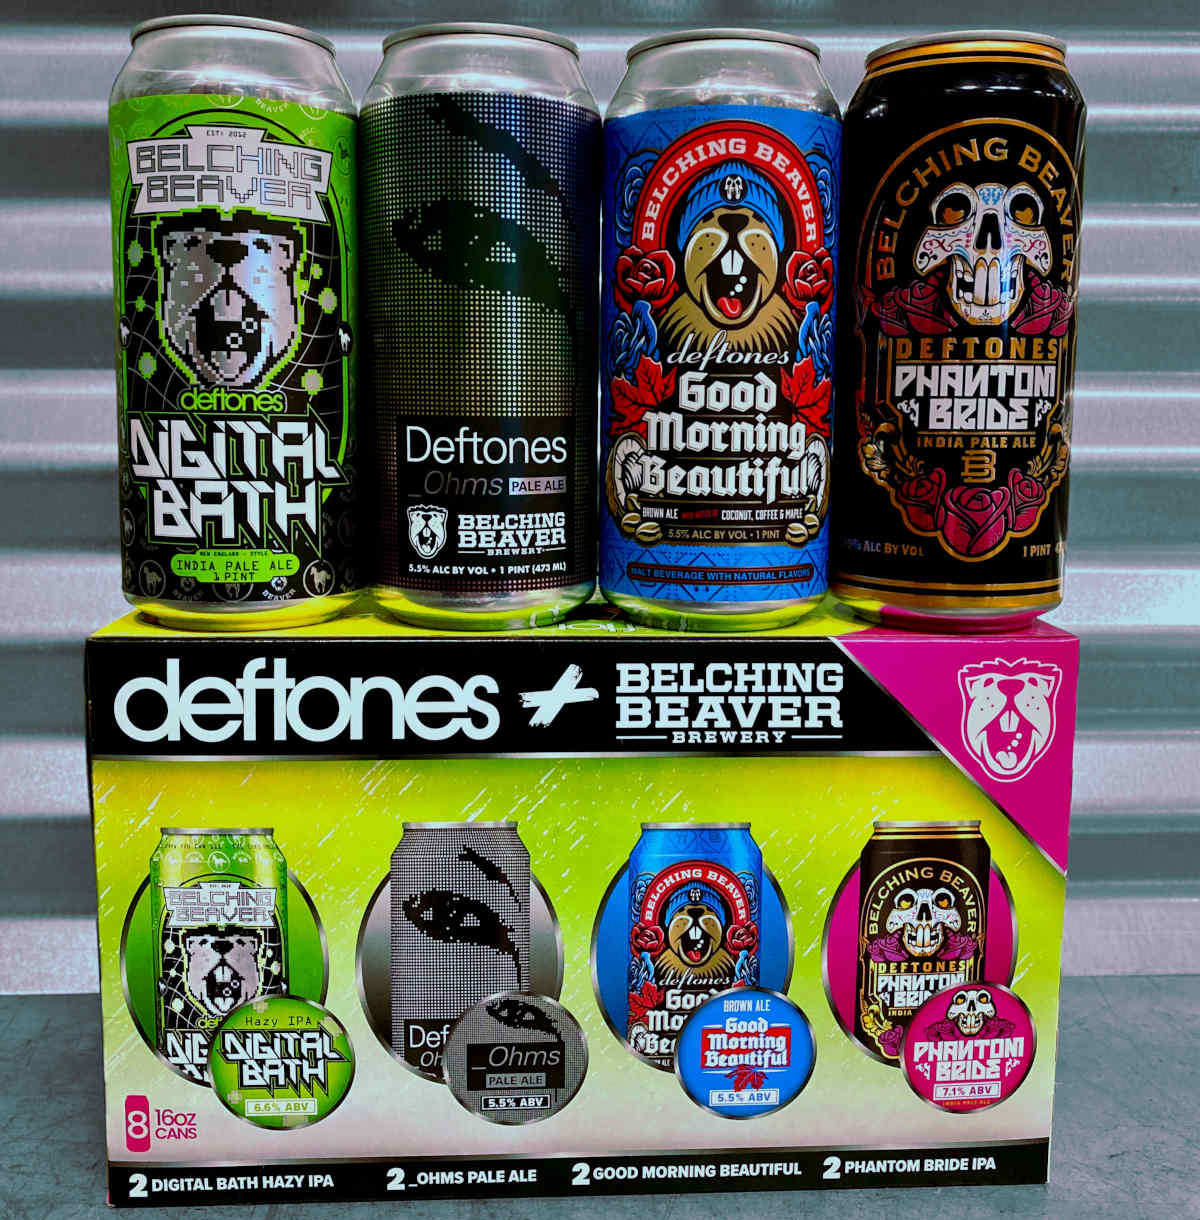 FrontRowPackCans beer cans and case